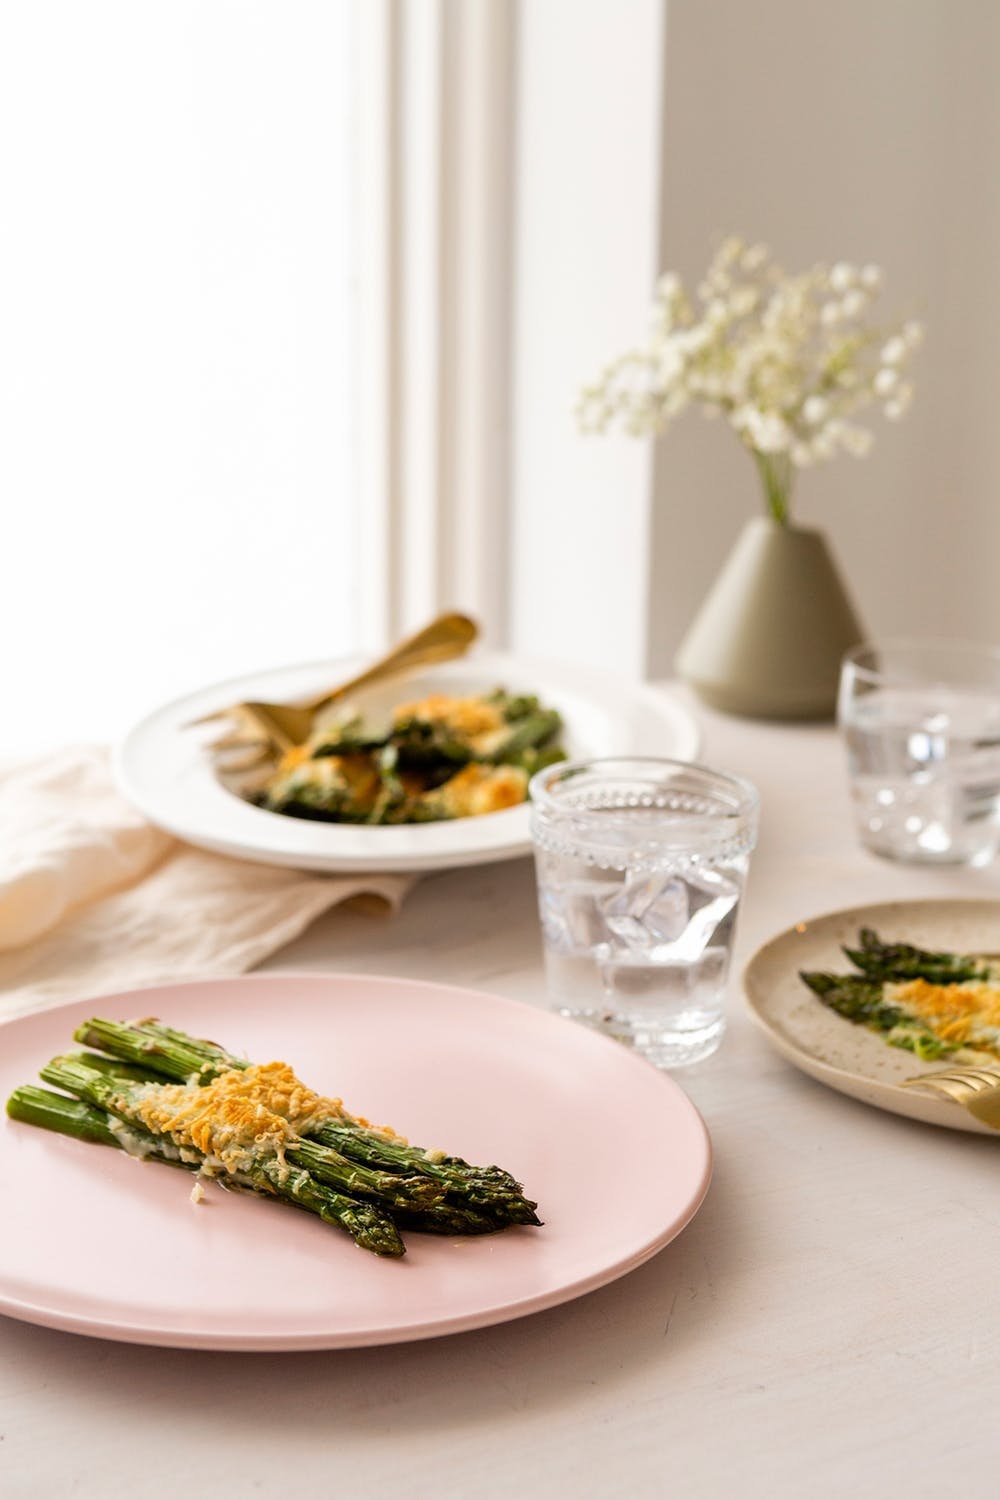 Nothing says spring like asparagus, and we are always down to cover any and every vegetable in cheese. This savory and cheesy combination takes about 20 minutes in the oven. (via Brit + Co.)